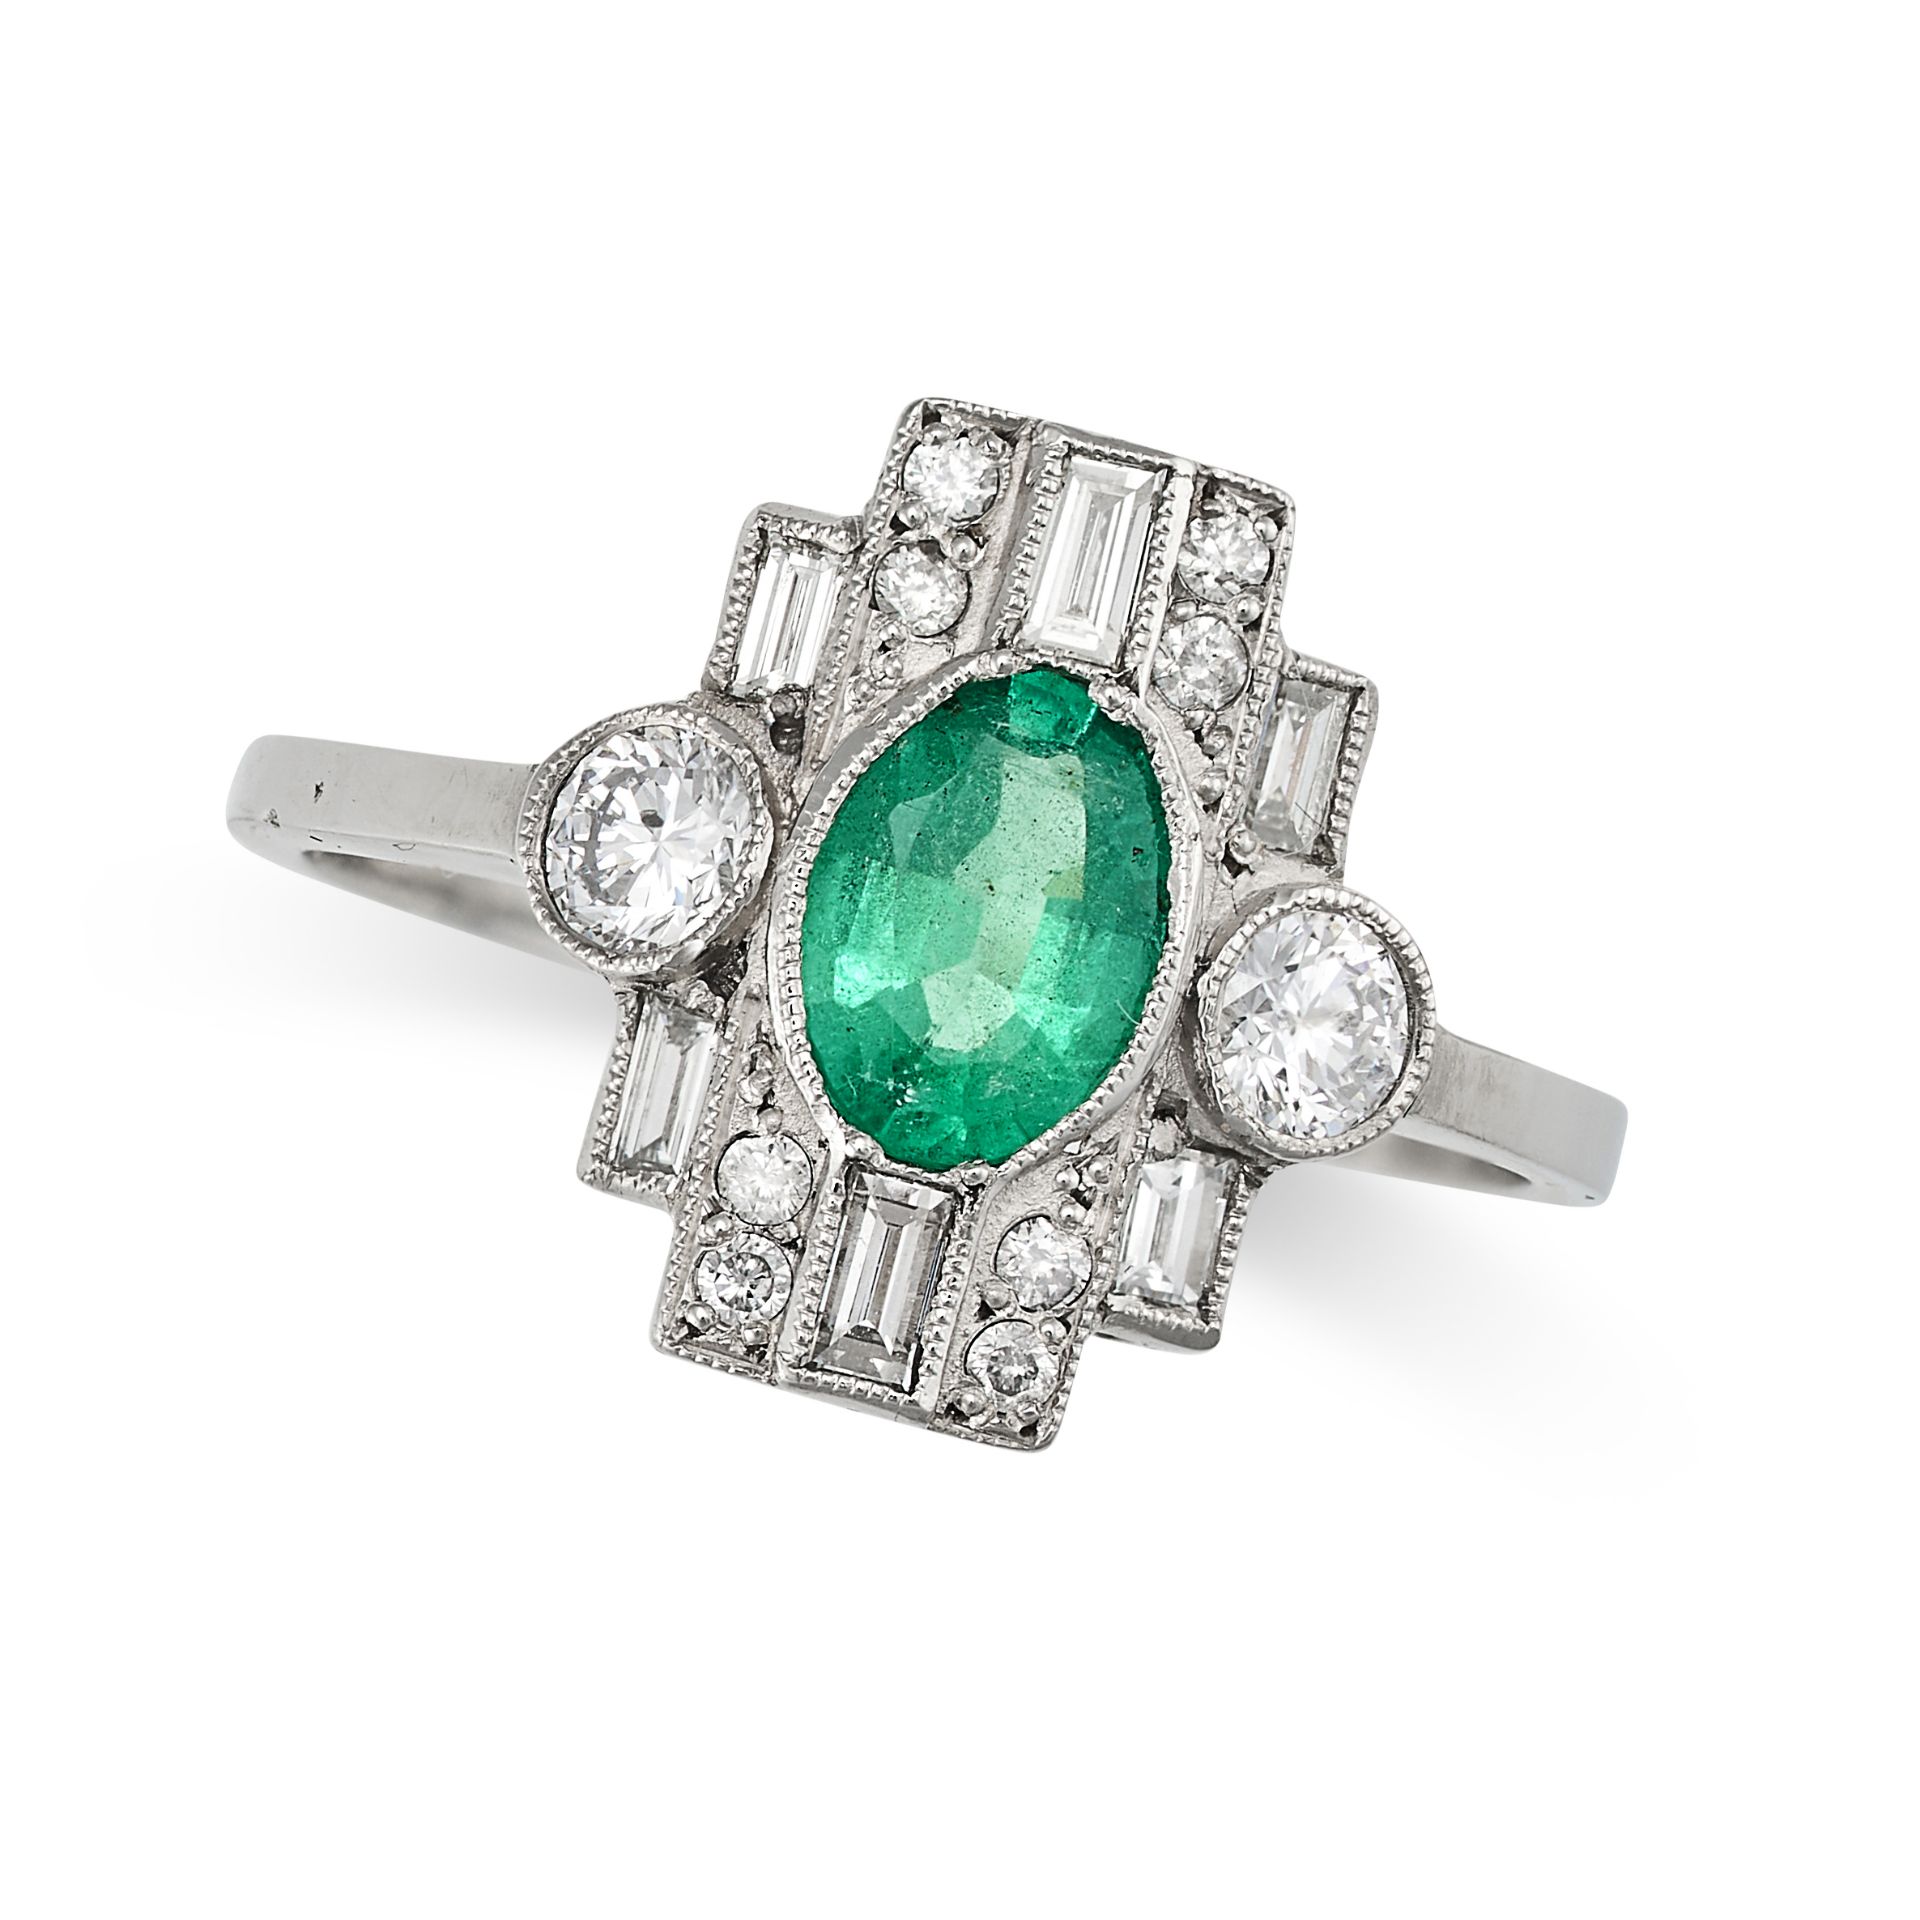 AN EMERALD AND DIAMOND RING in platinum, set with an oval cut emerald accented by round brilliant...